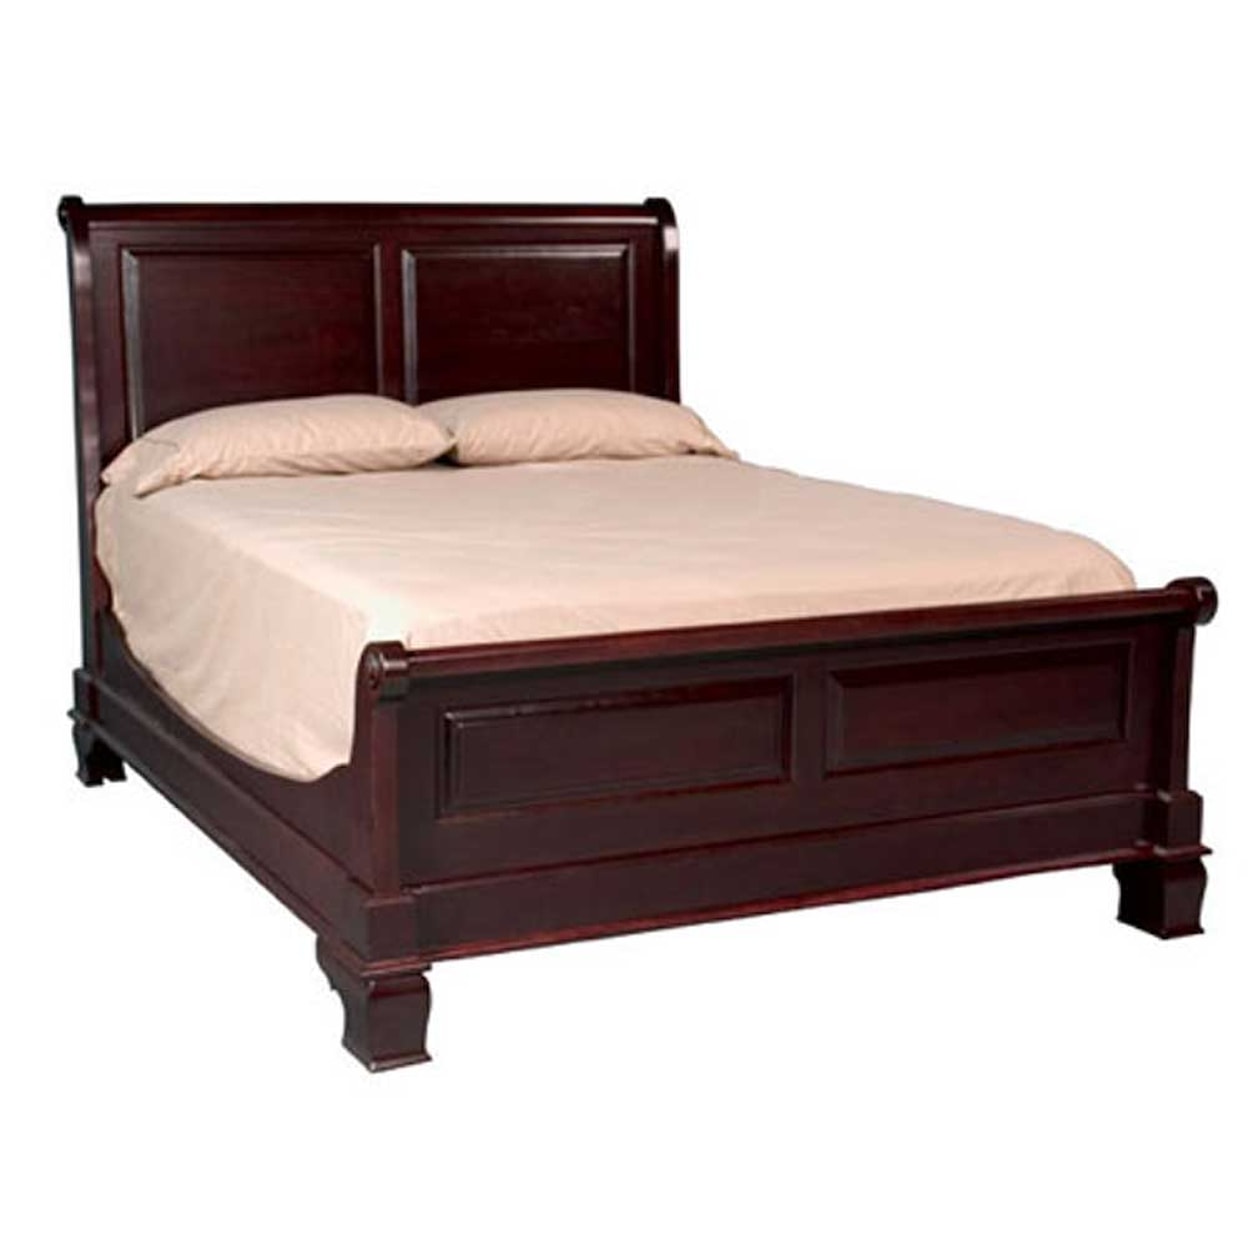 Simply Amish Imperial Amish Queen Sleigh Bed